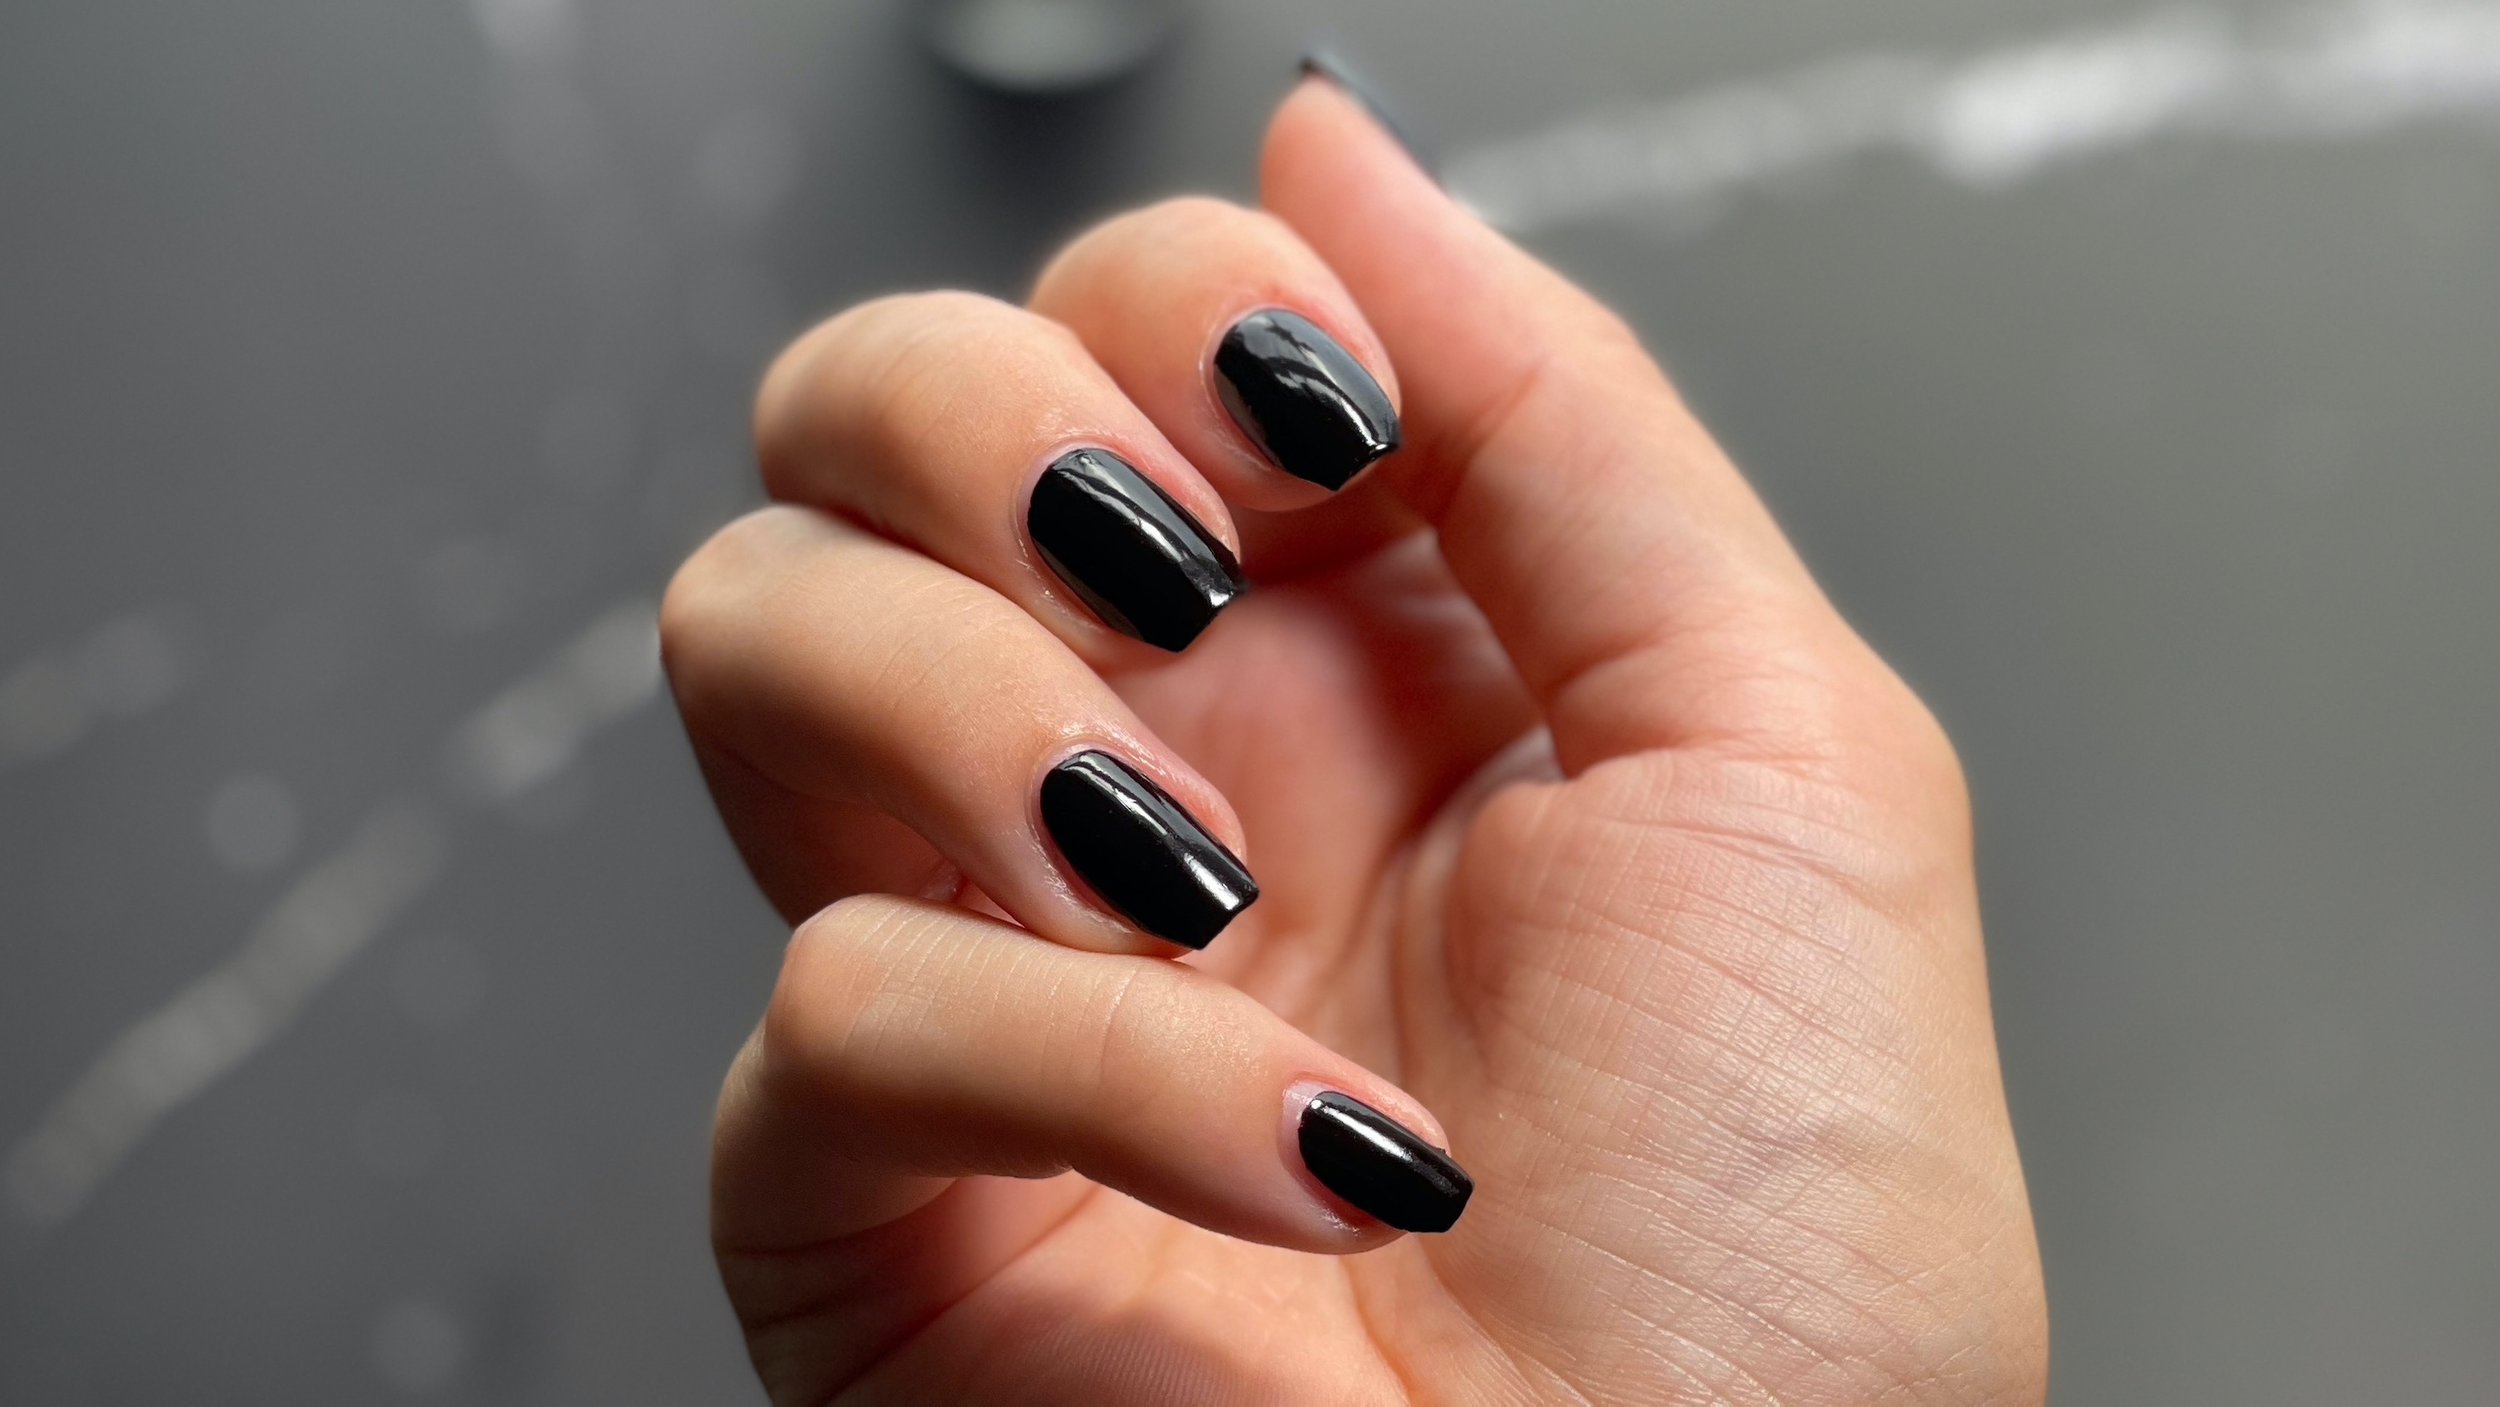 1. OPI Nail Lacquer in "Lincoln Park After Dark" - wide 9